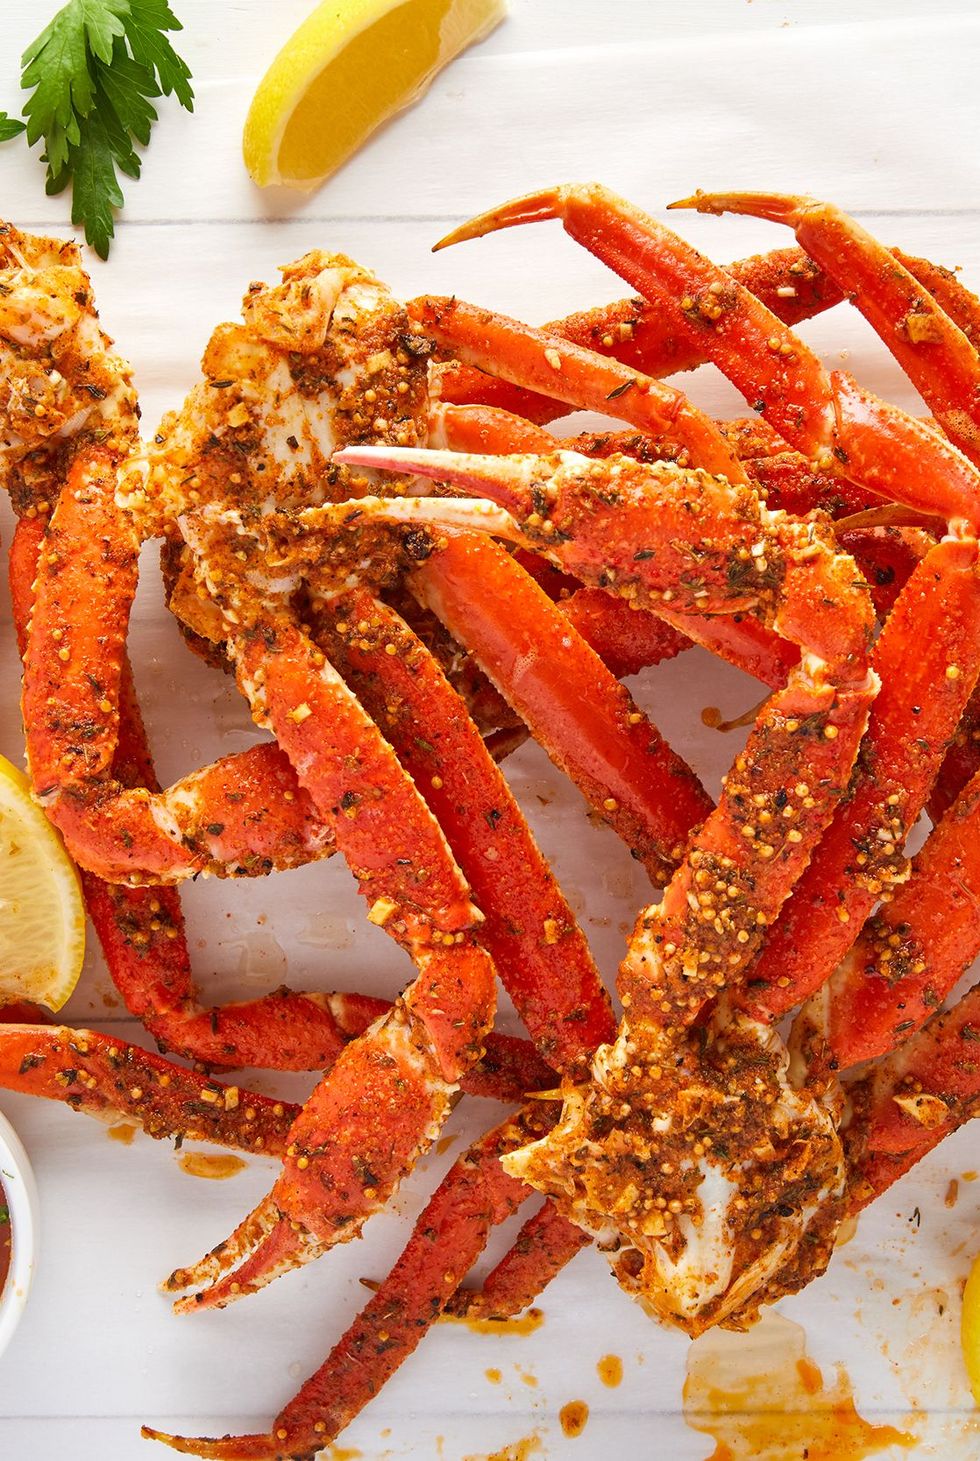 how to cook crab legs